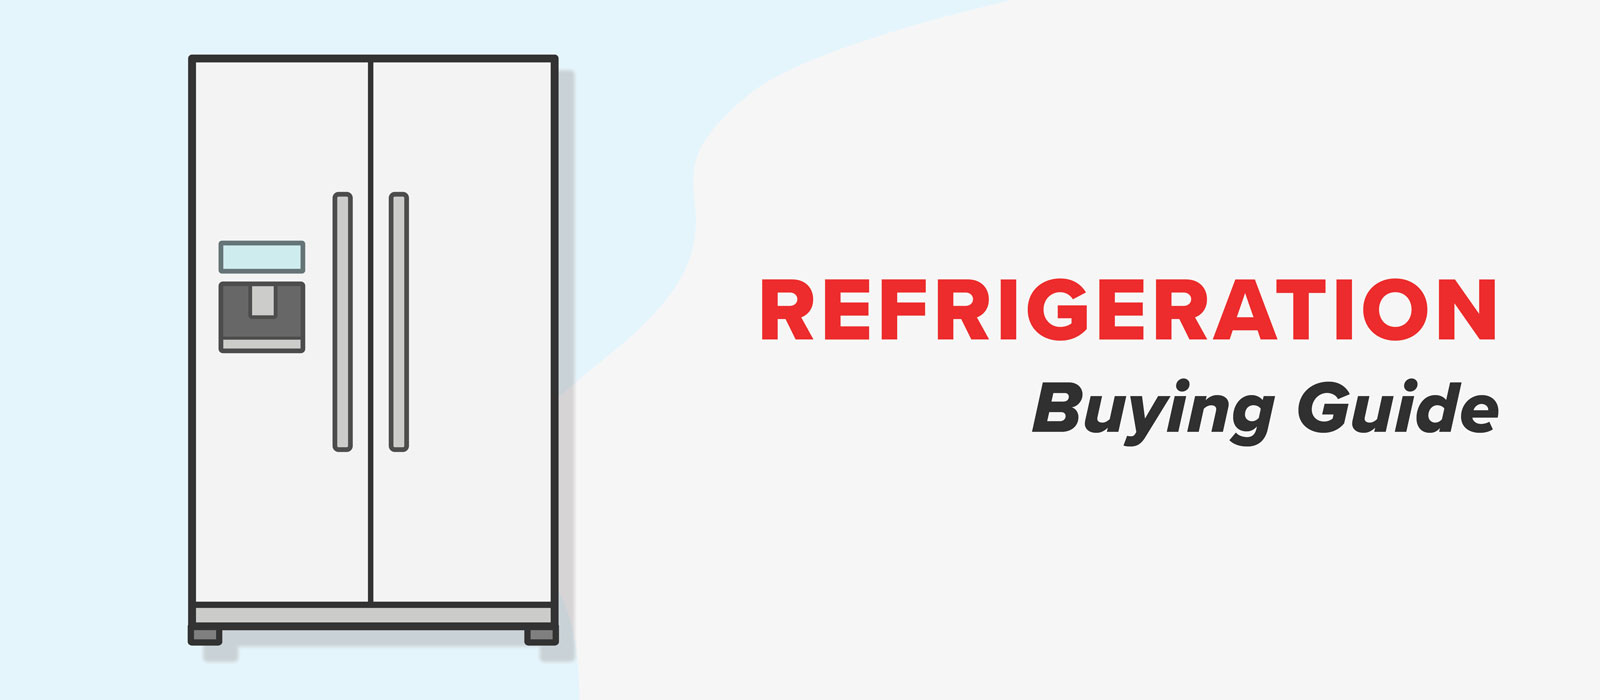 Grand Appliance Refrigeration Buying Guide